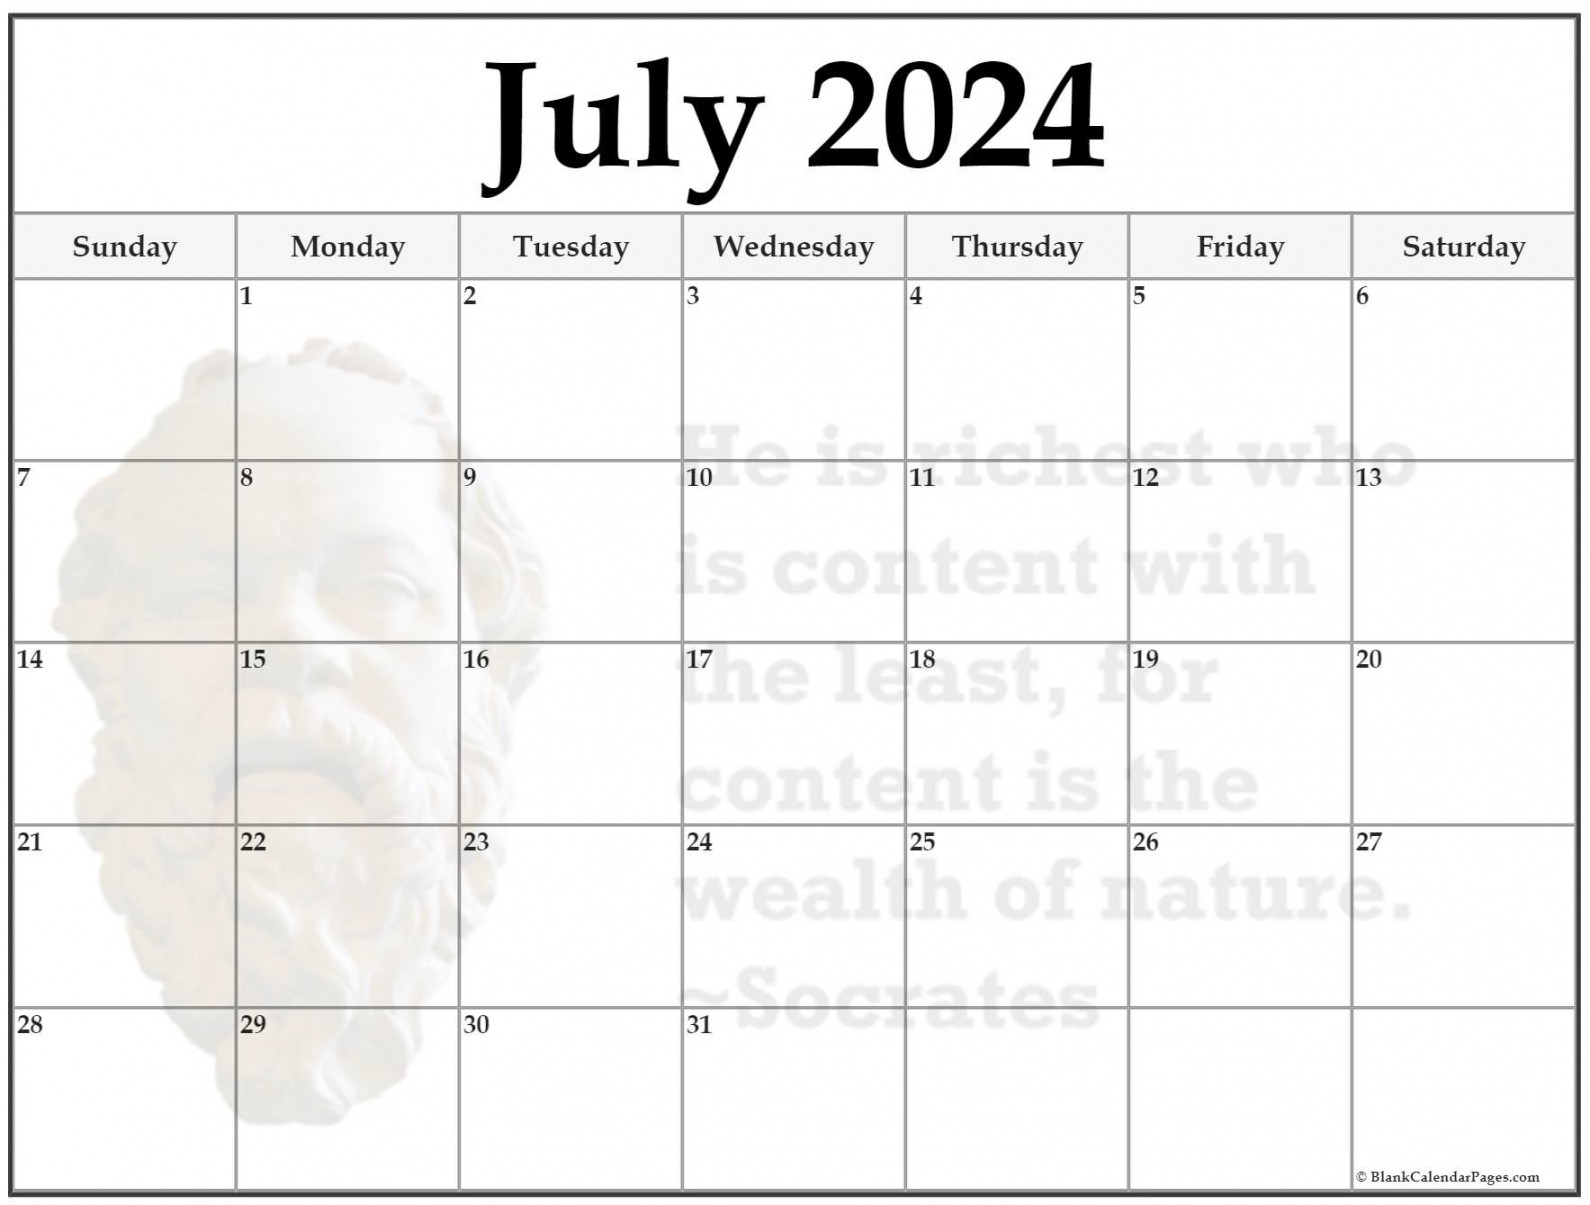 + July 20 quote calendars